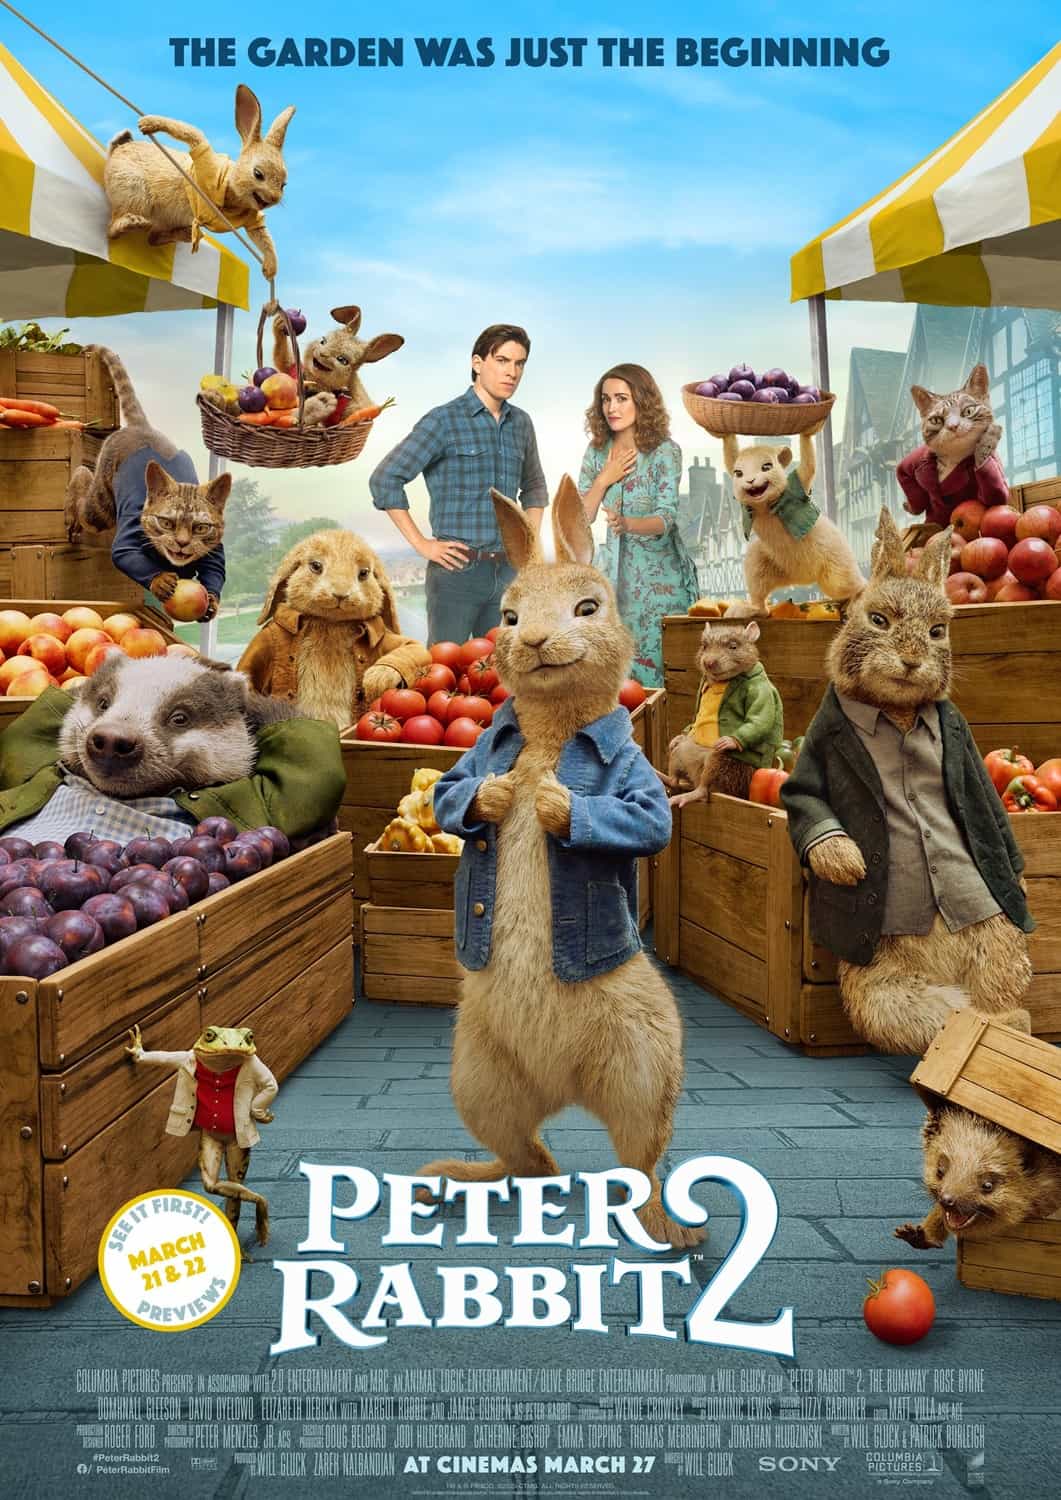 Peter Rabbit 2 is the top movie at the UK box office over summer 2021 beating Black Widow and Fast and Furious 9